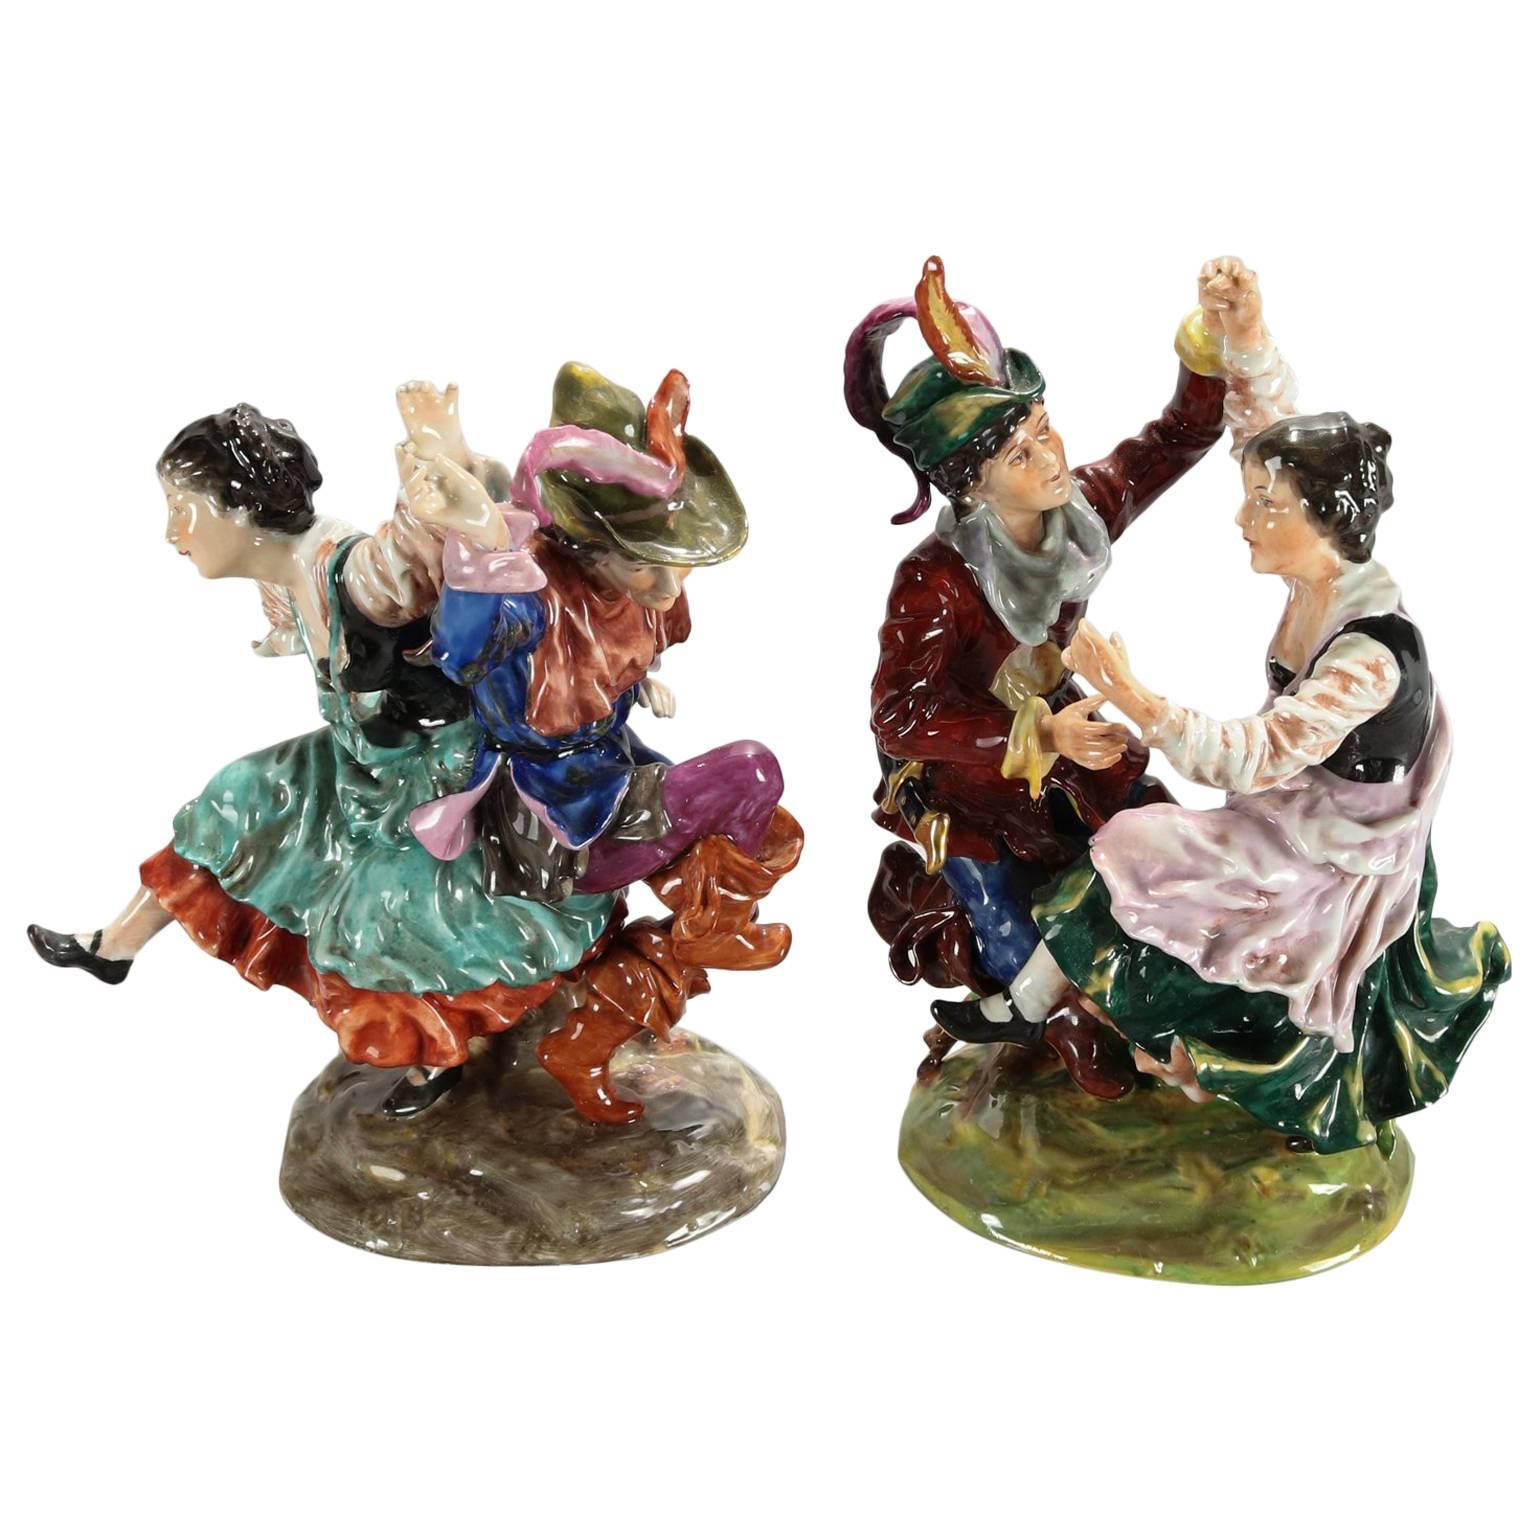 Set of Two Antique Hand-Painted Dresden Porcelain Old World Dancing Couples